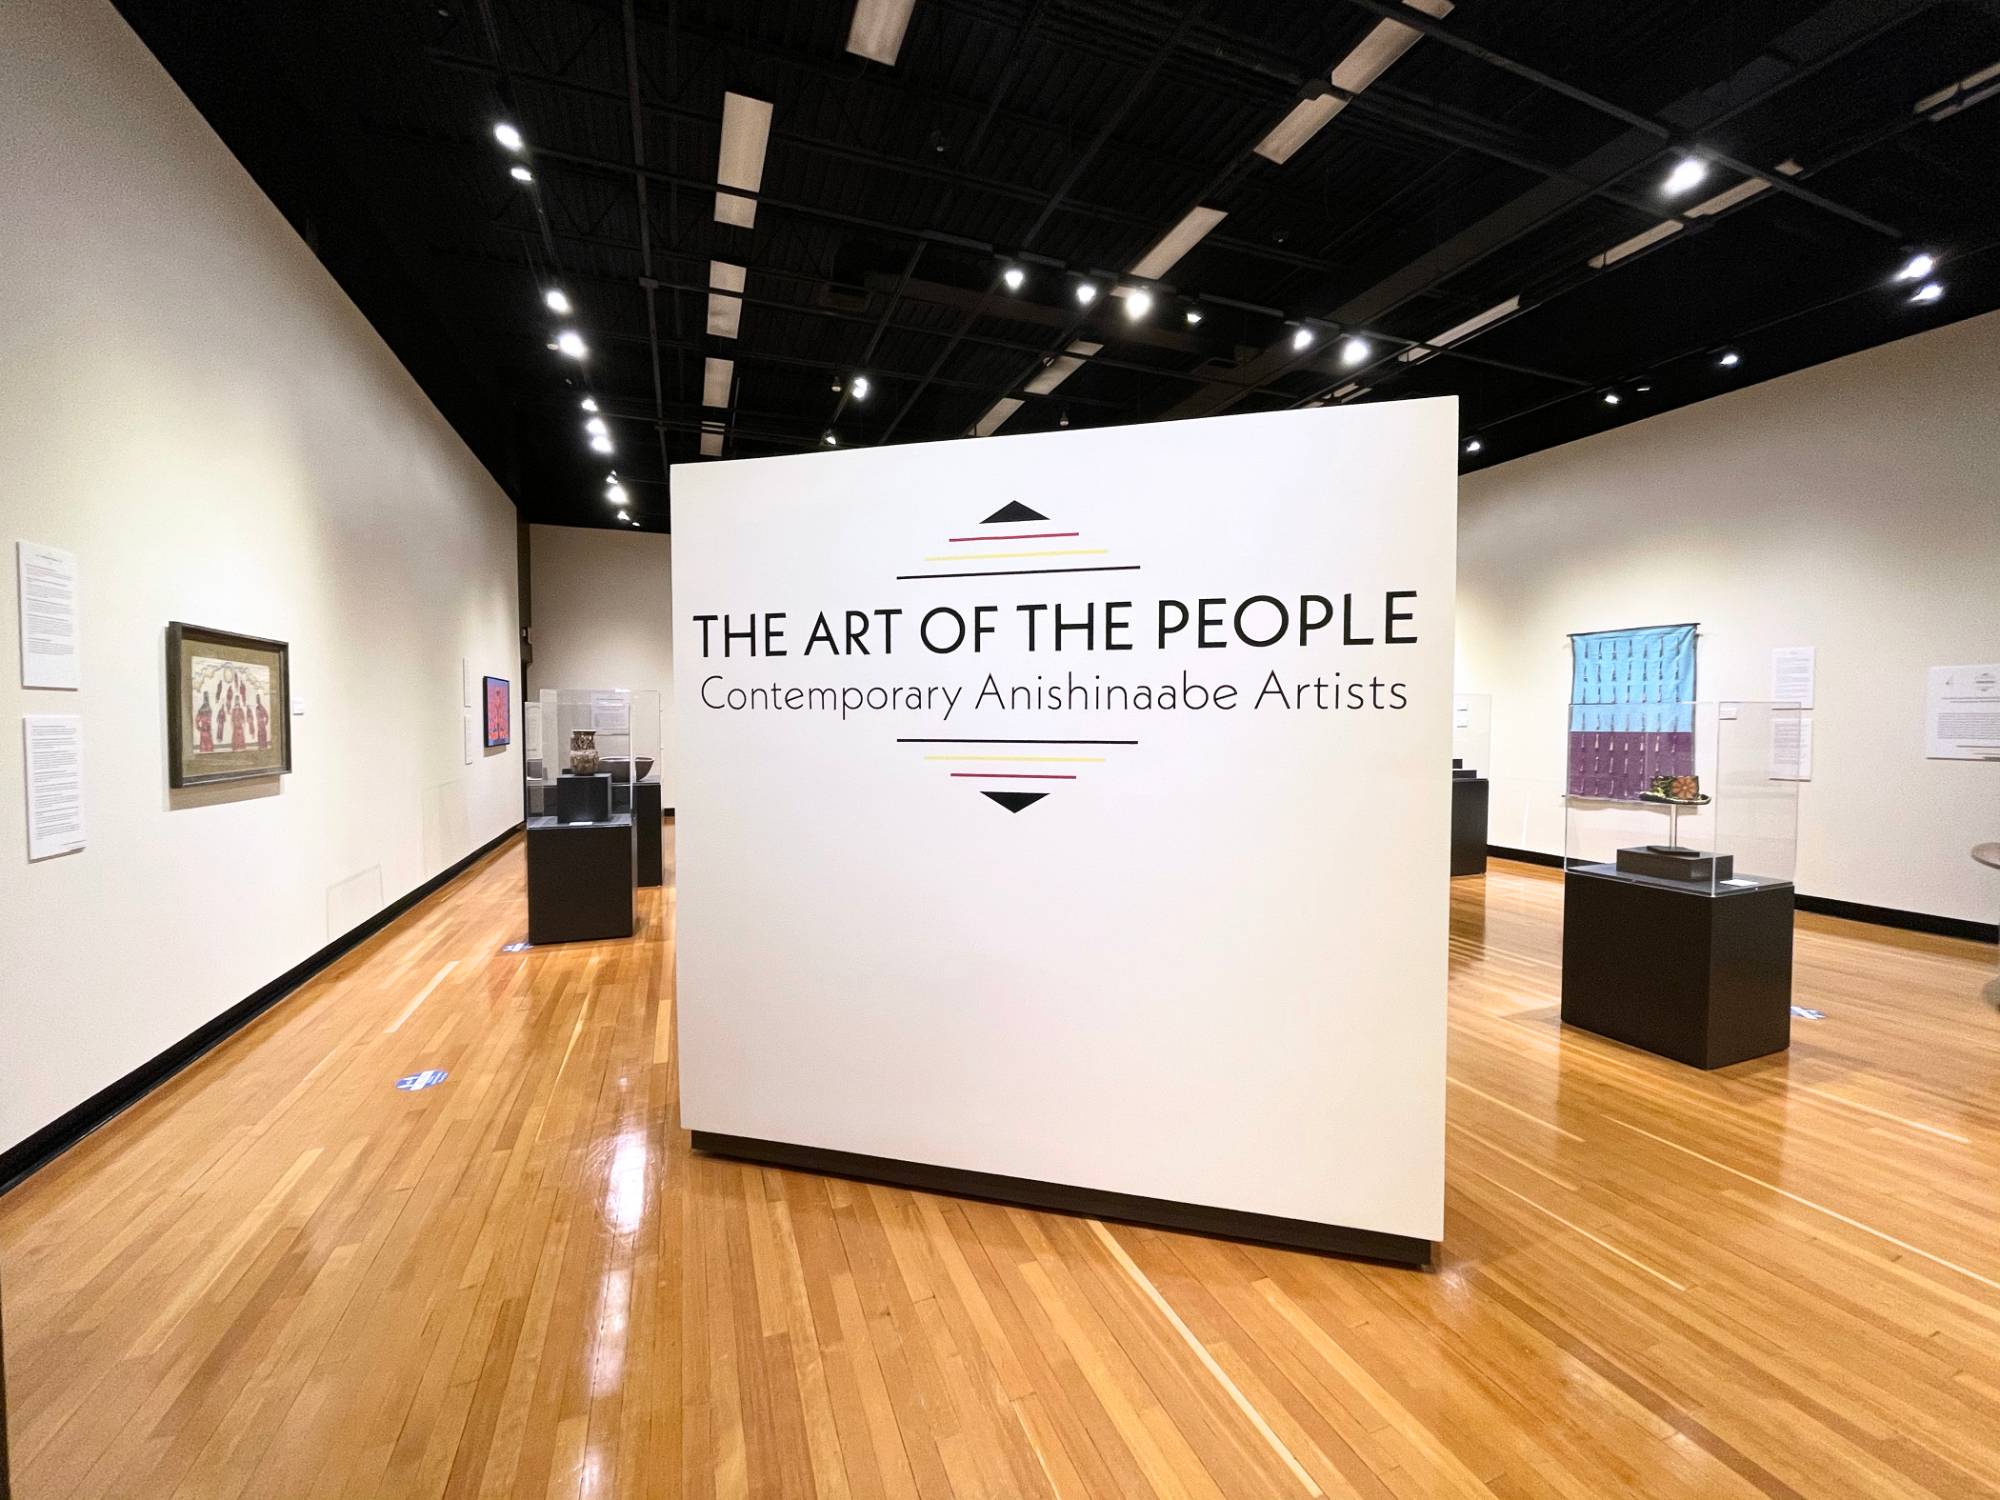 The Art of the People: Contemporary Anishinaabe Artists at the GVSU Art Gallery